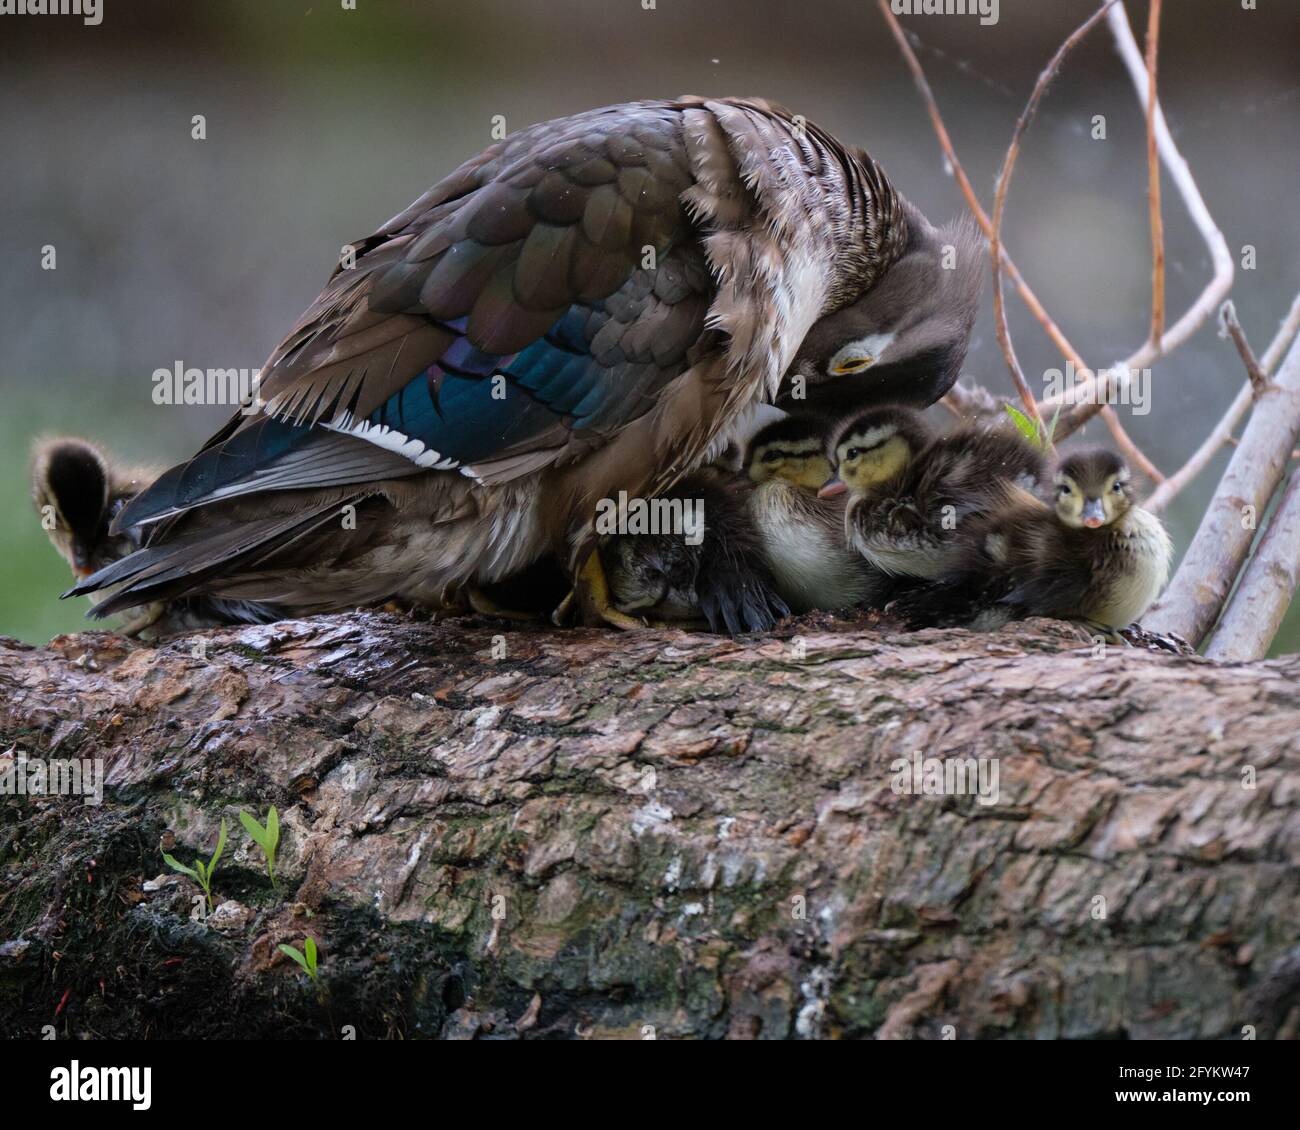 Mother wood duck, Aix sponsa, providing warmth by covering her brood sitting on a log. The recently hatched babies still depend on the care of their mother to look for food as well as provide protection from predators. Stock Photo